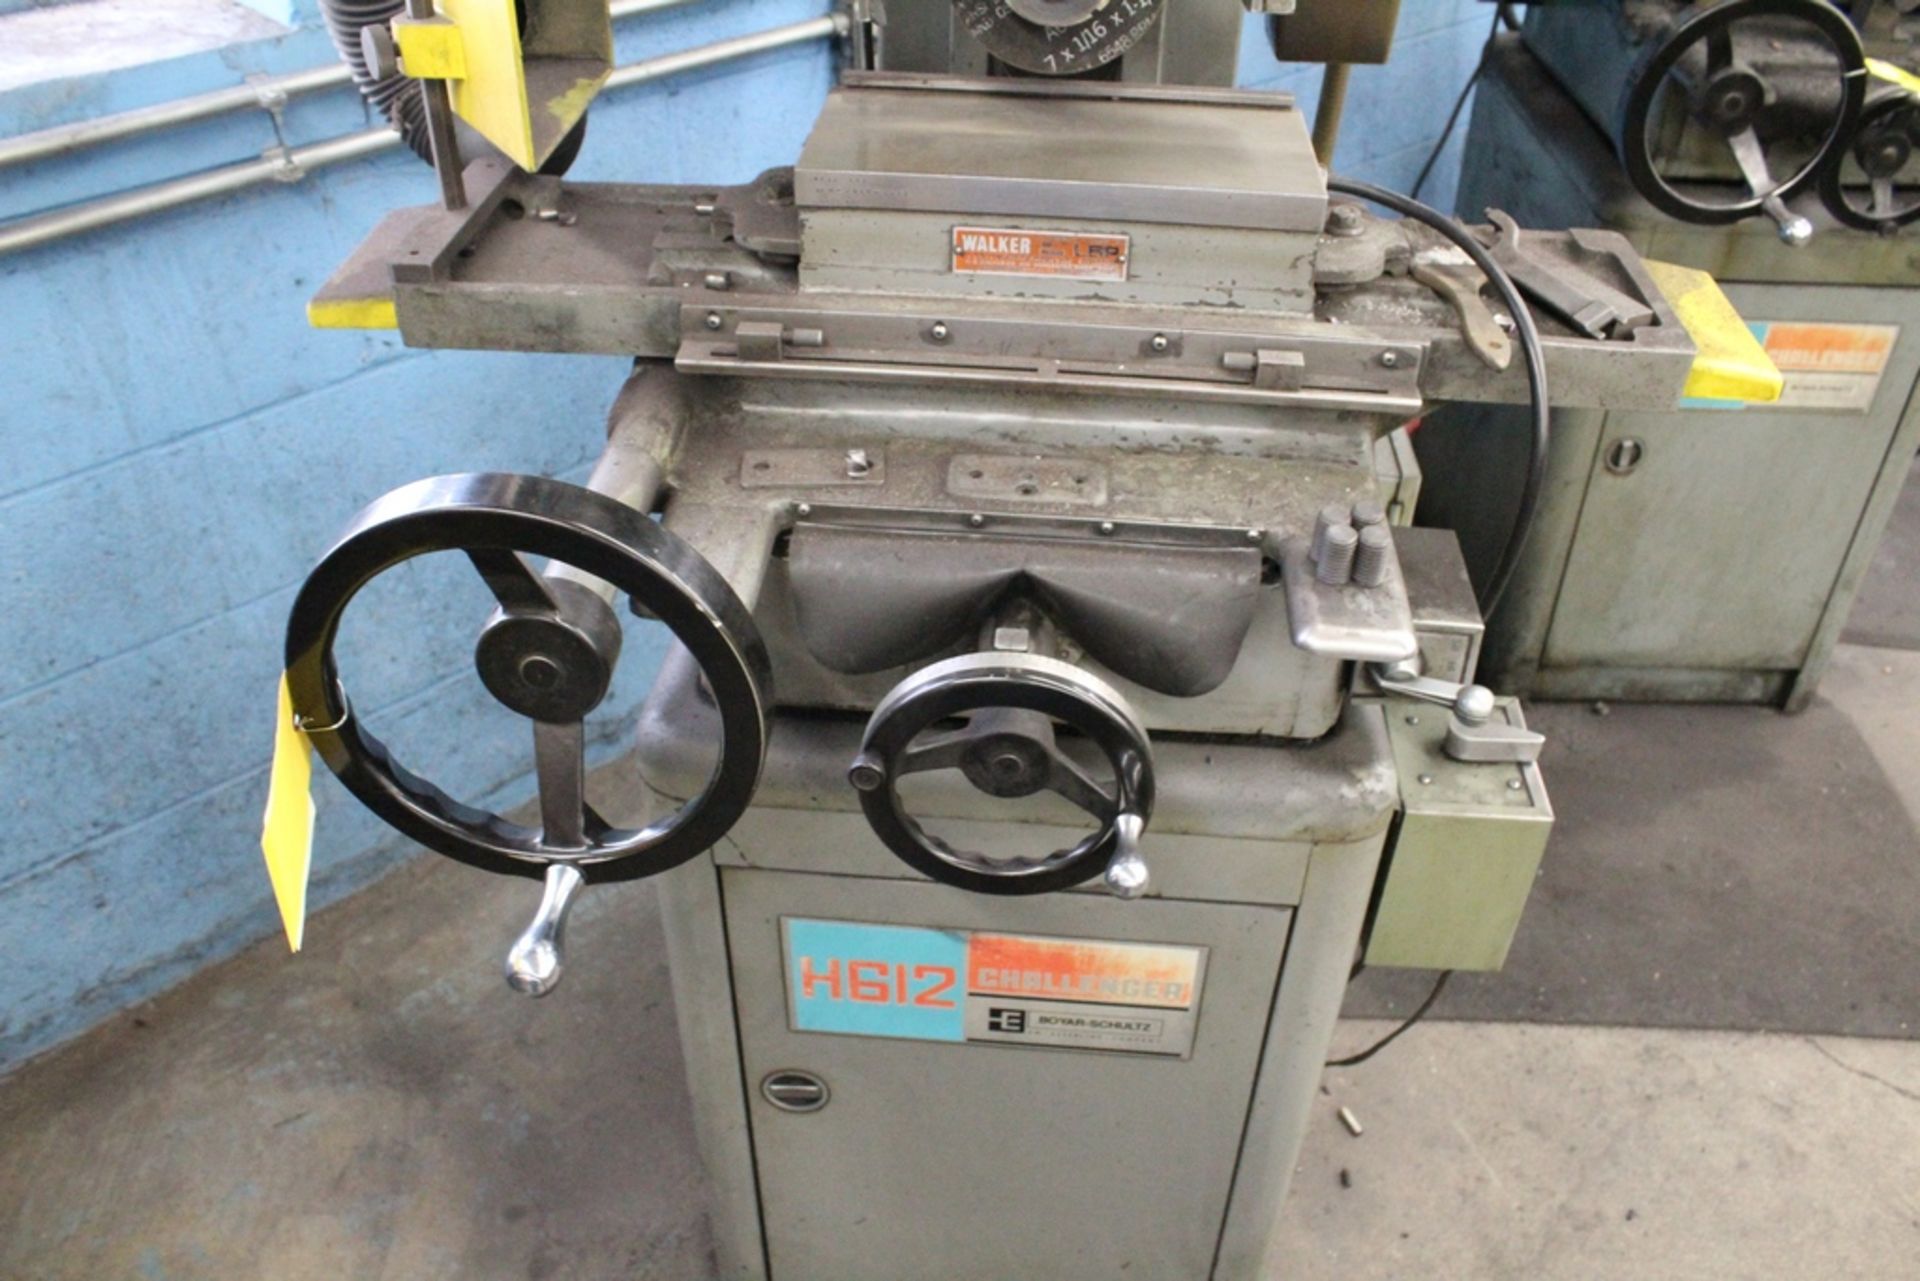 BOYAR SCHULTZ 6”X12” MODEL H612 CHALLENGER SURFACE GRINDER, S/N 27643 WITH ELECTROMAGNETIC CHUCK - Image 4 of 4